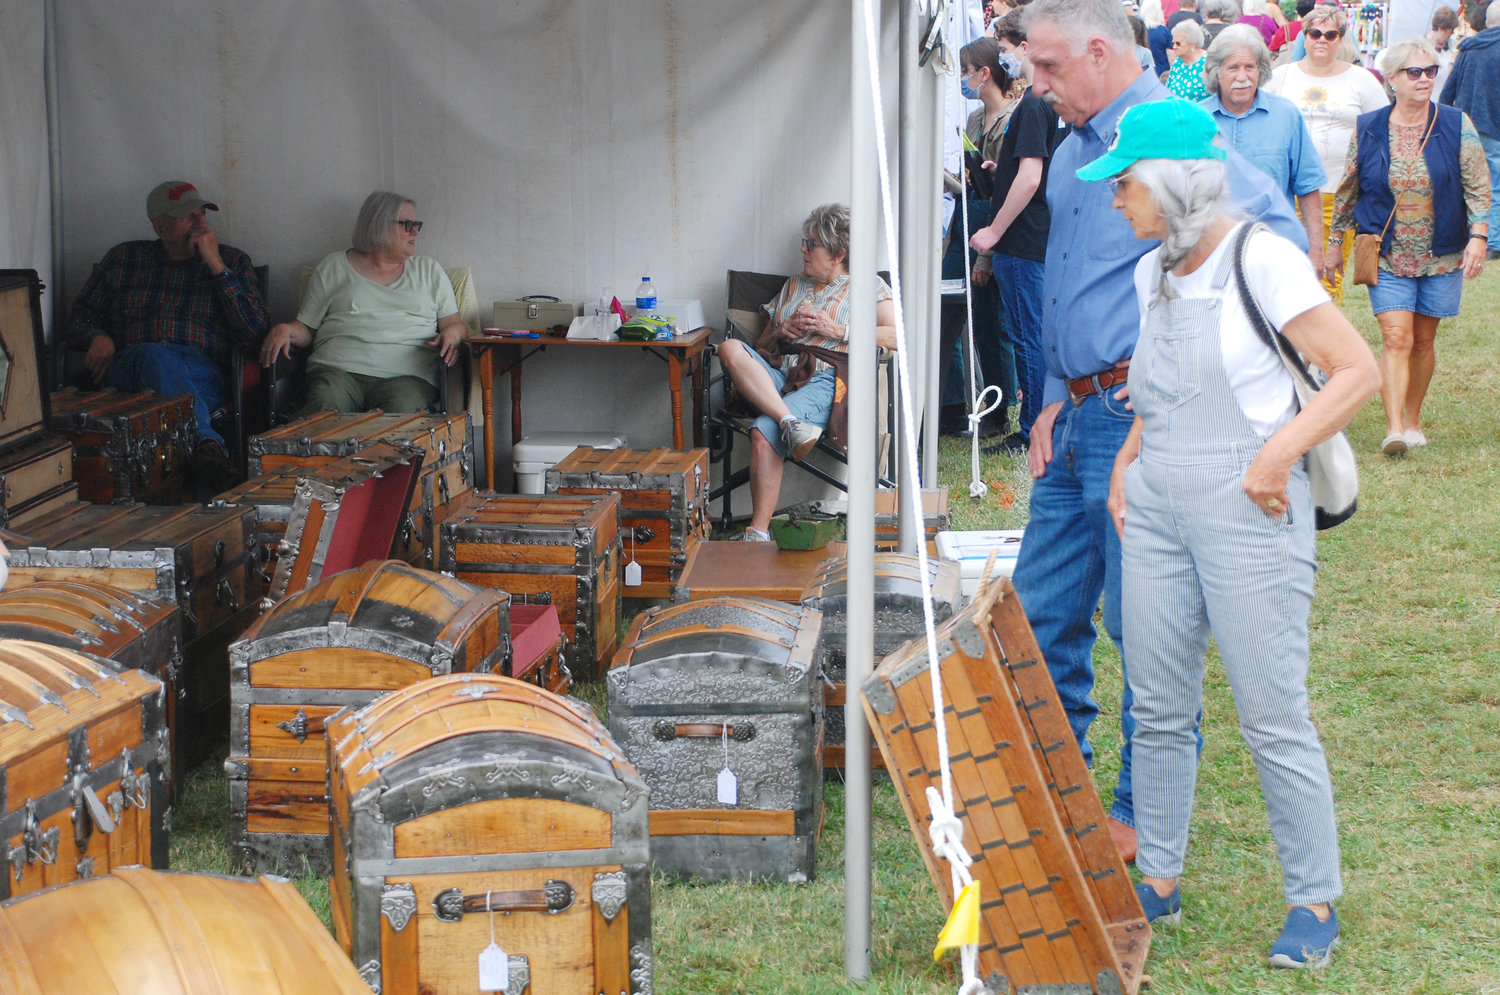 GUESTS EXAMINE HANDMADE WOODEN CHESTS for sale at the 47th Annual Ozark Arts and Crafts Fair at Finley River Park.